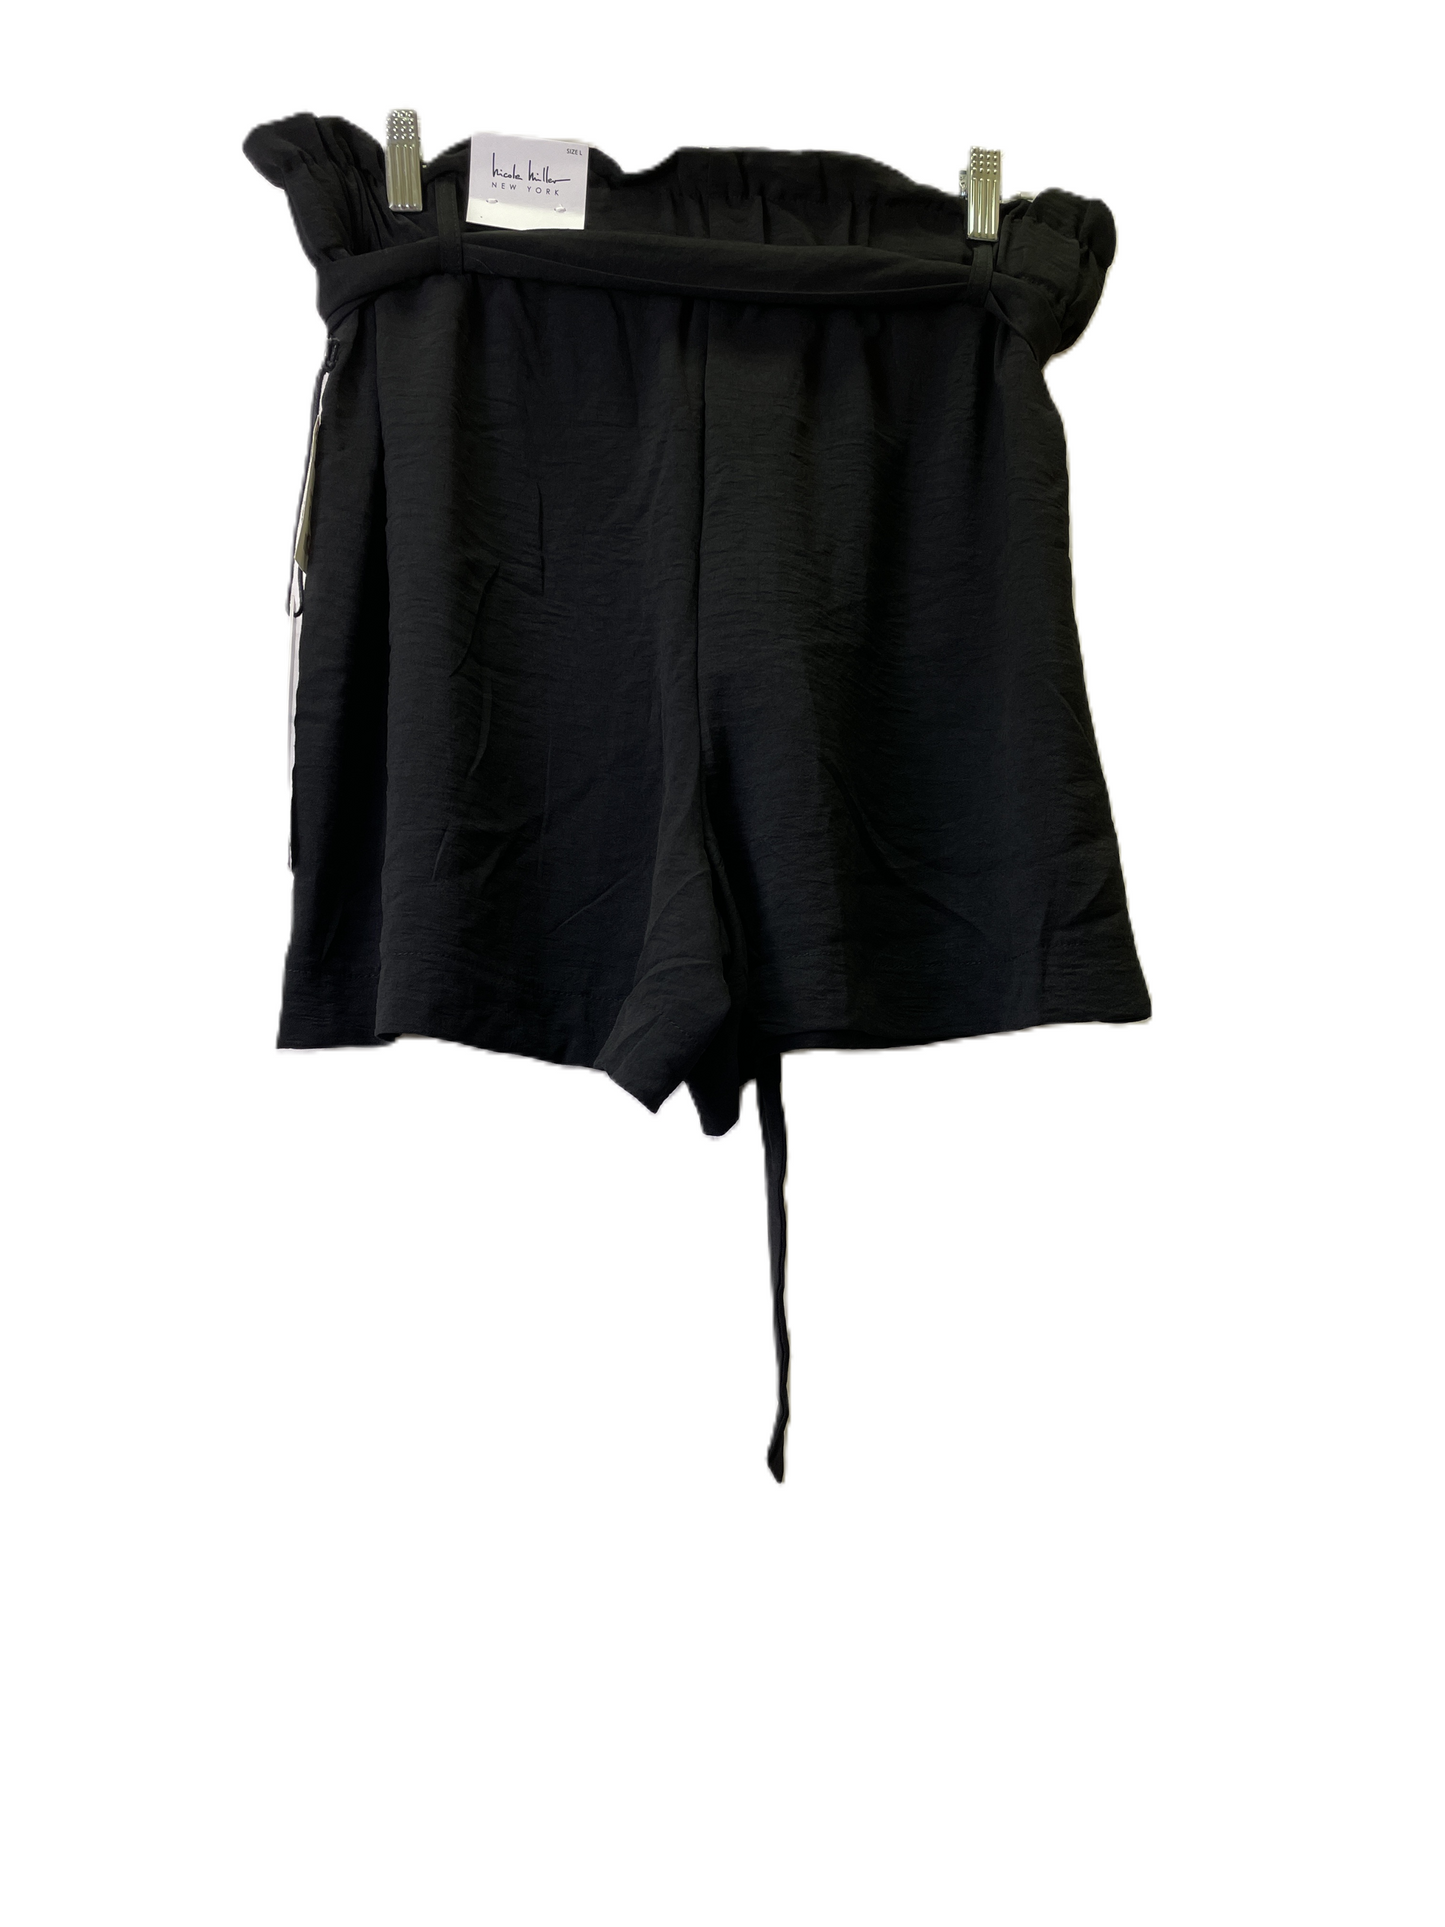 Black Shorts By Nicole Miller, Size: L